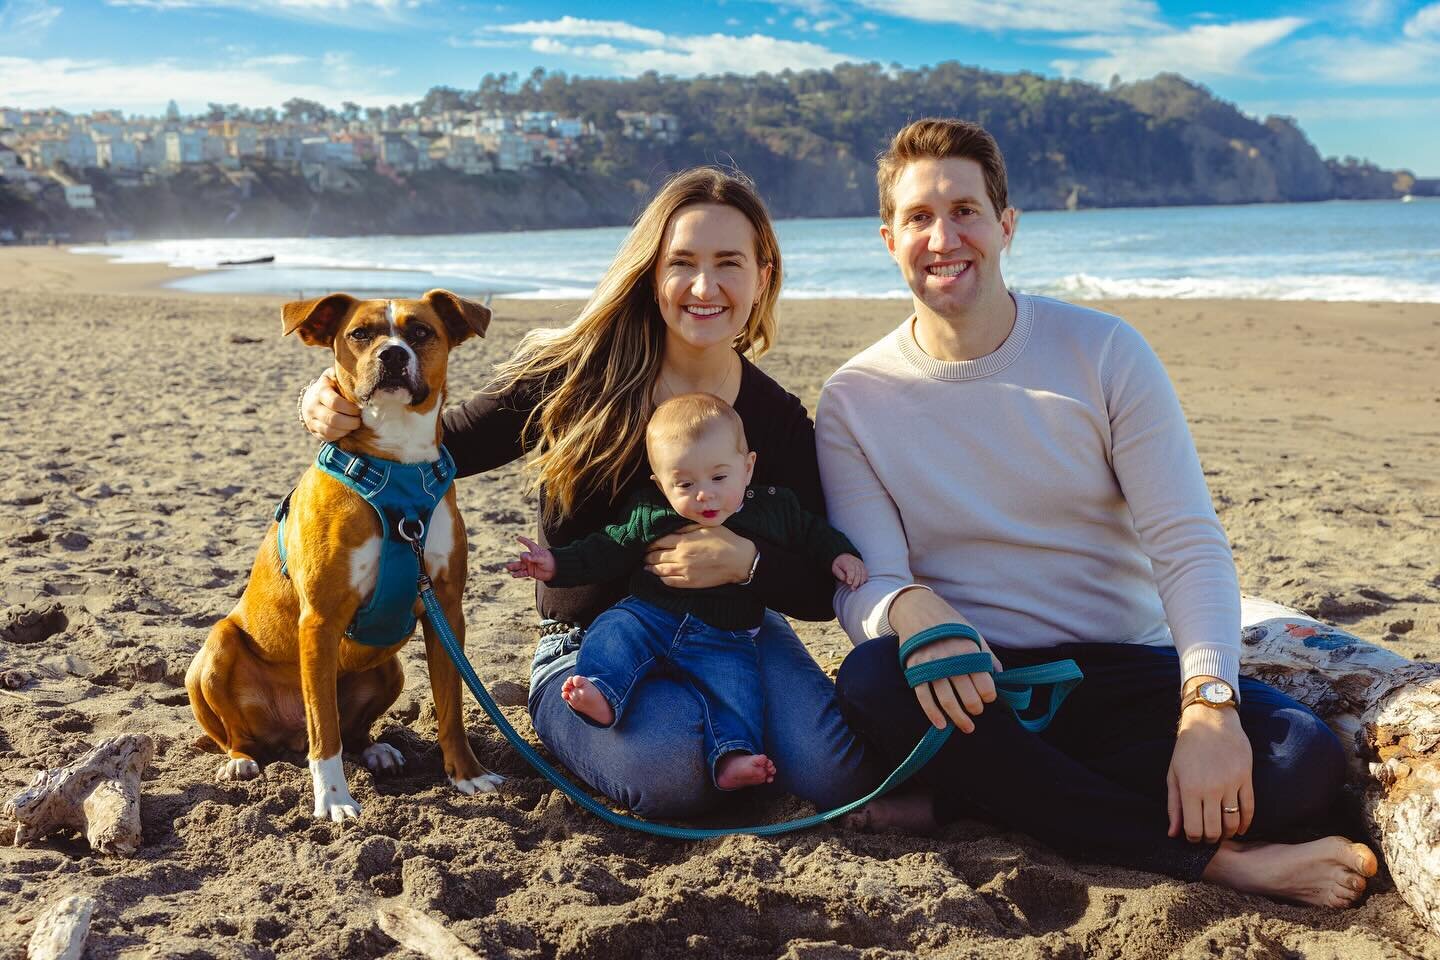 Family photos with dogs are my absolutely favorite.

#elketeichmannphoto #elketeichmannphotography 
#photographer&nbsp;#photography&nbsp;#bayareaphotographer&nbsp;#femalephotographer&nbsp;#photo #baby #babies #dog #babyphotography #family #familyport